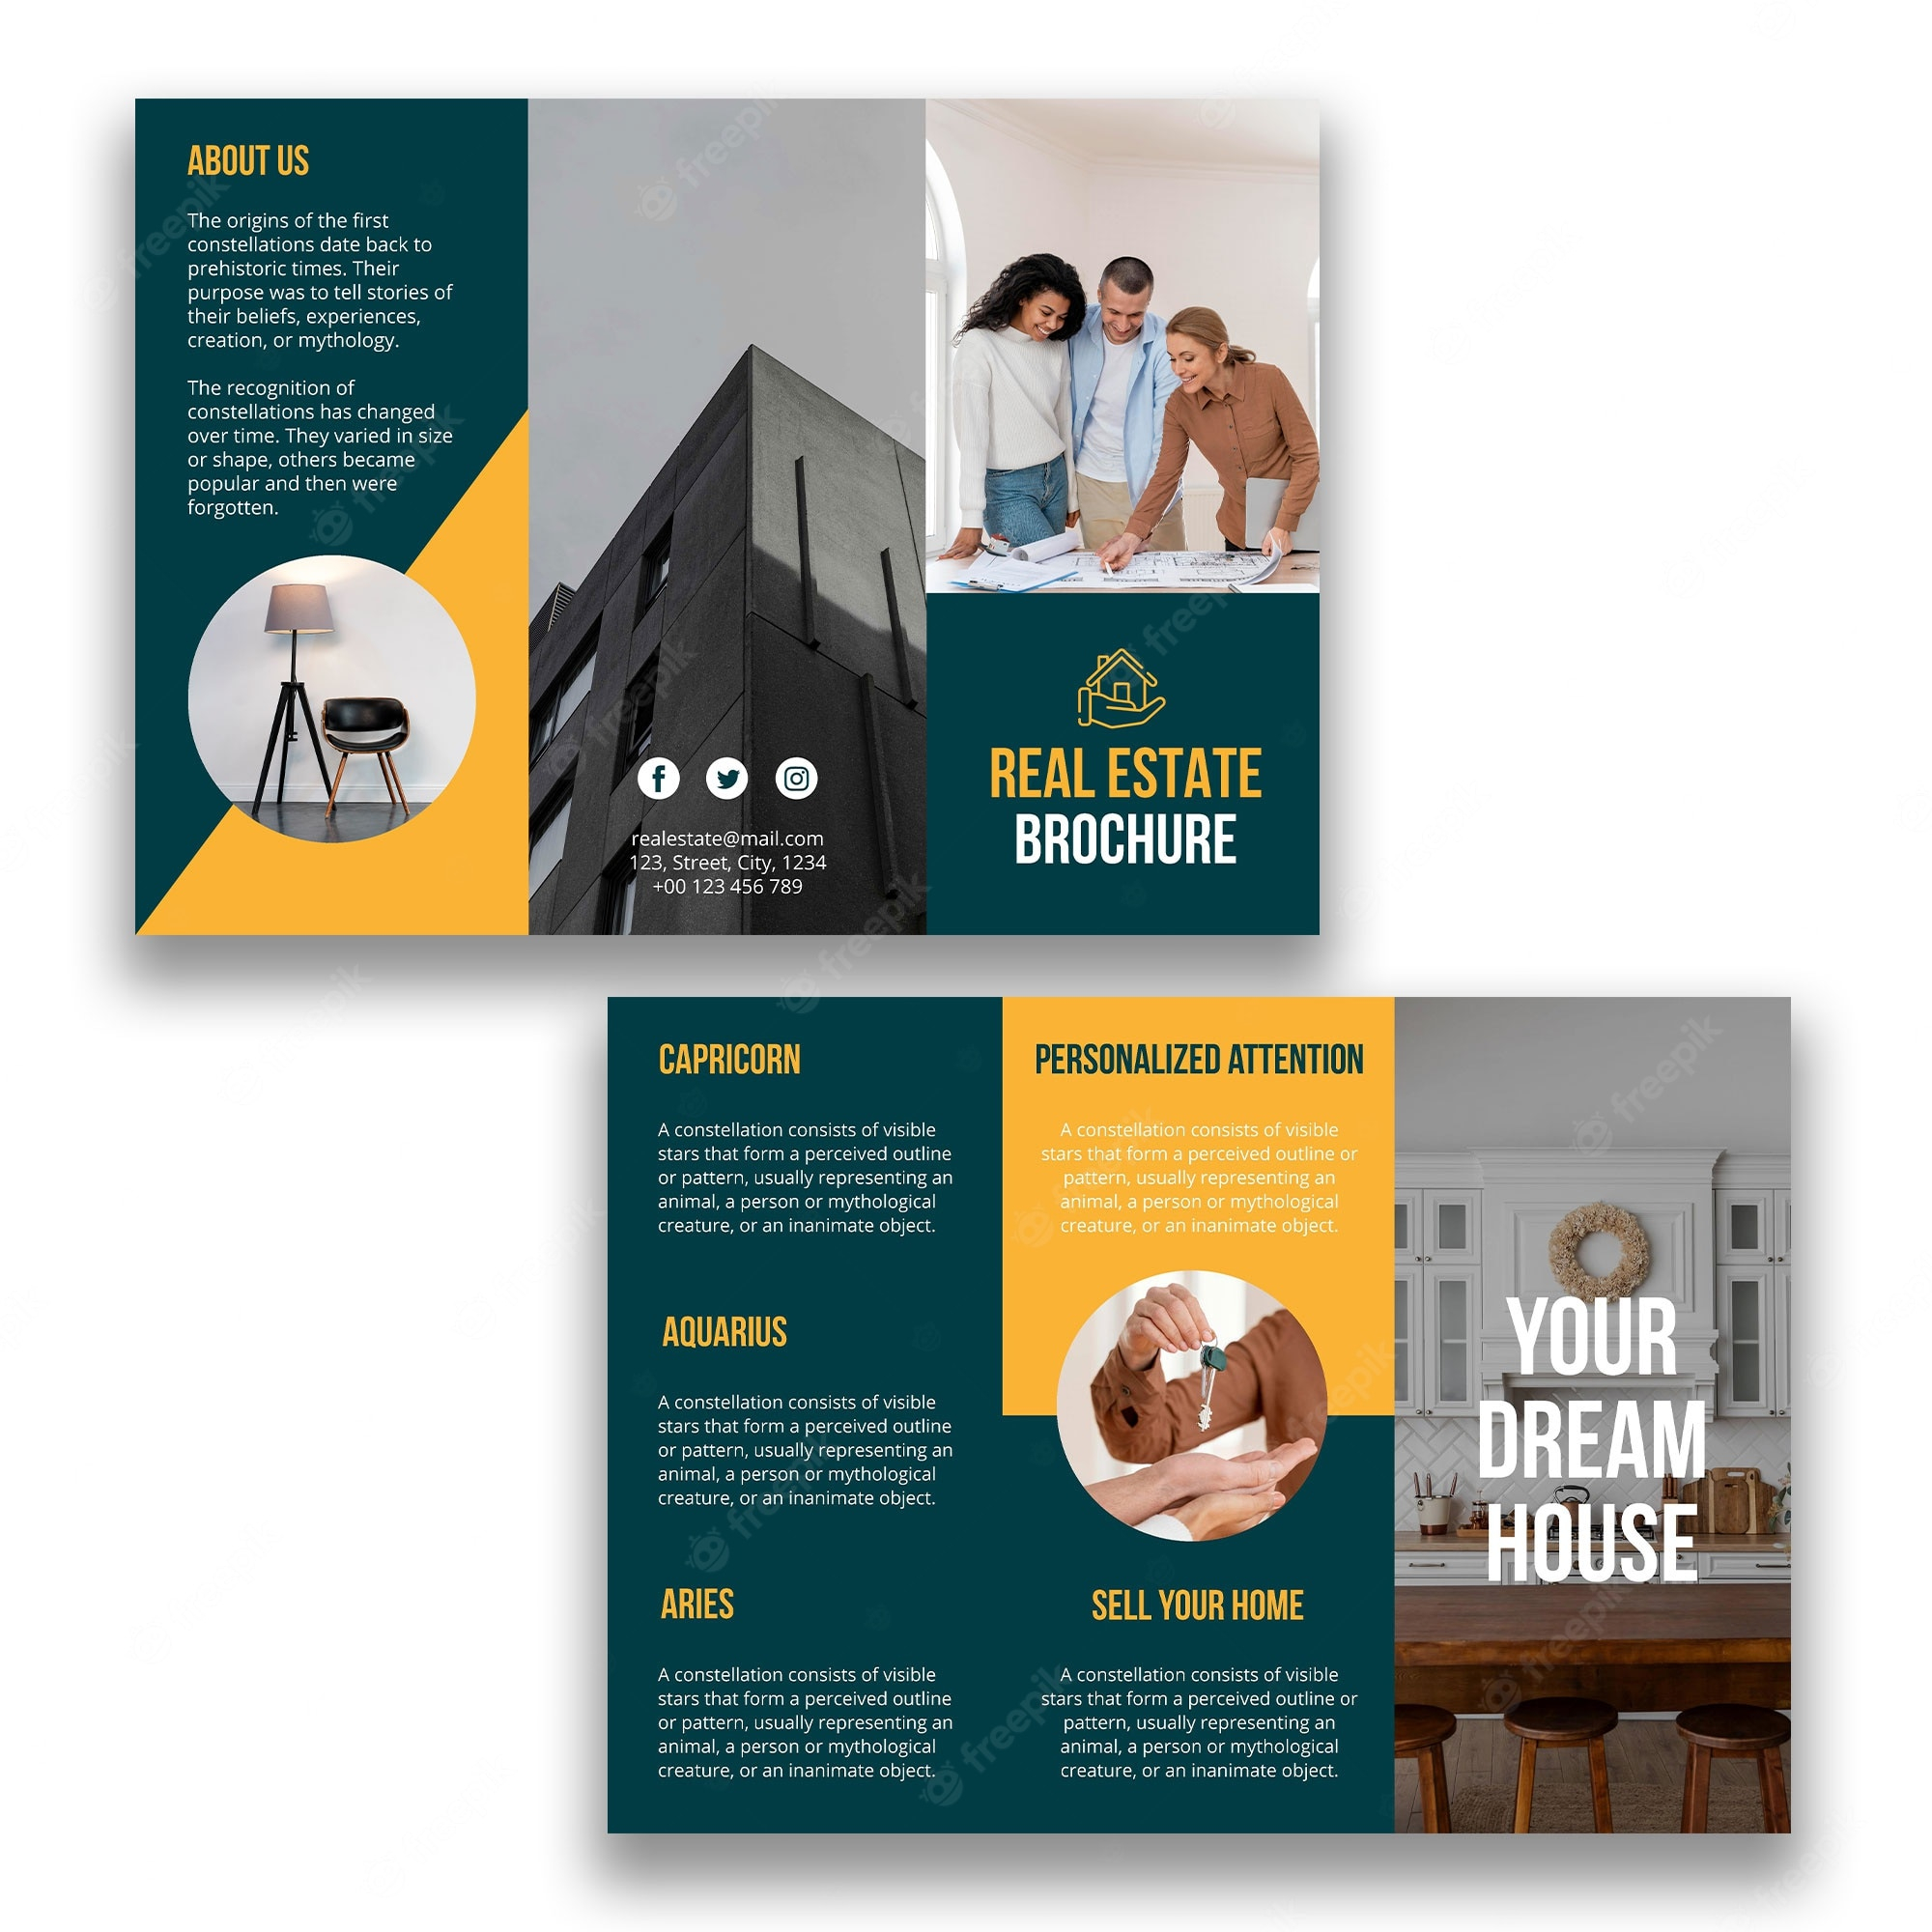 Real estate brochure Images  Free Vectors, Stock Photos & PSD Inside Real Estate Brochure Templates Psd Free Download